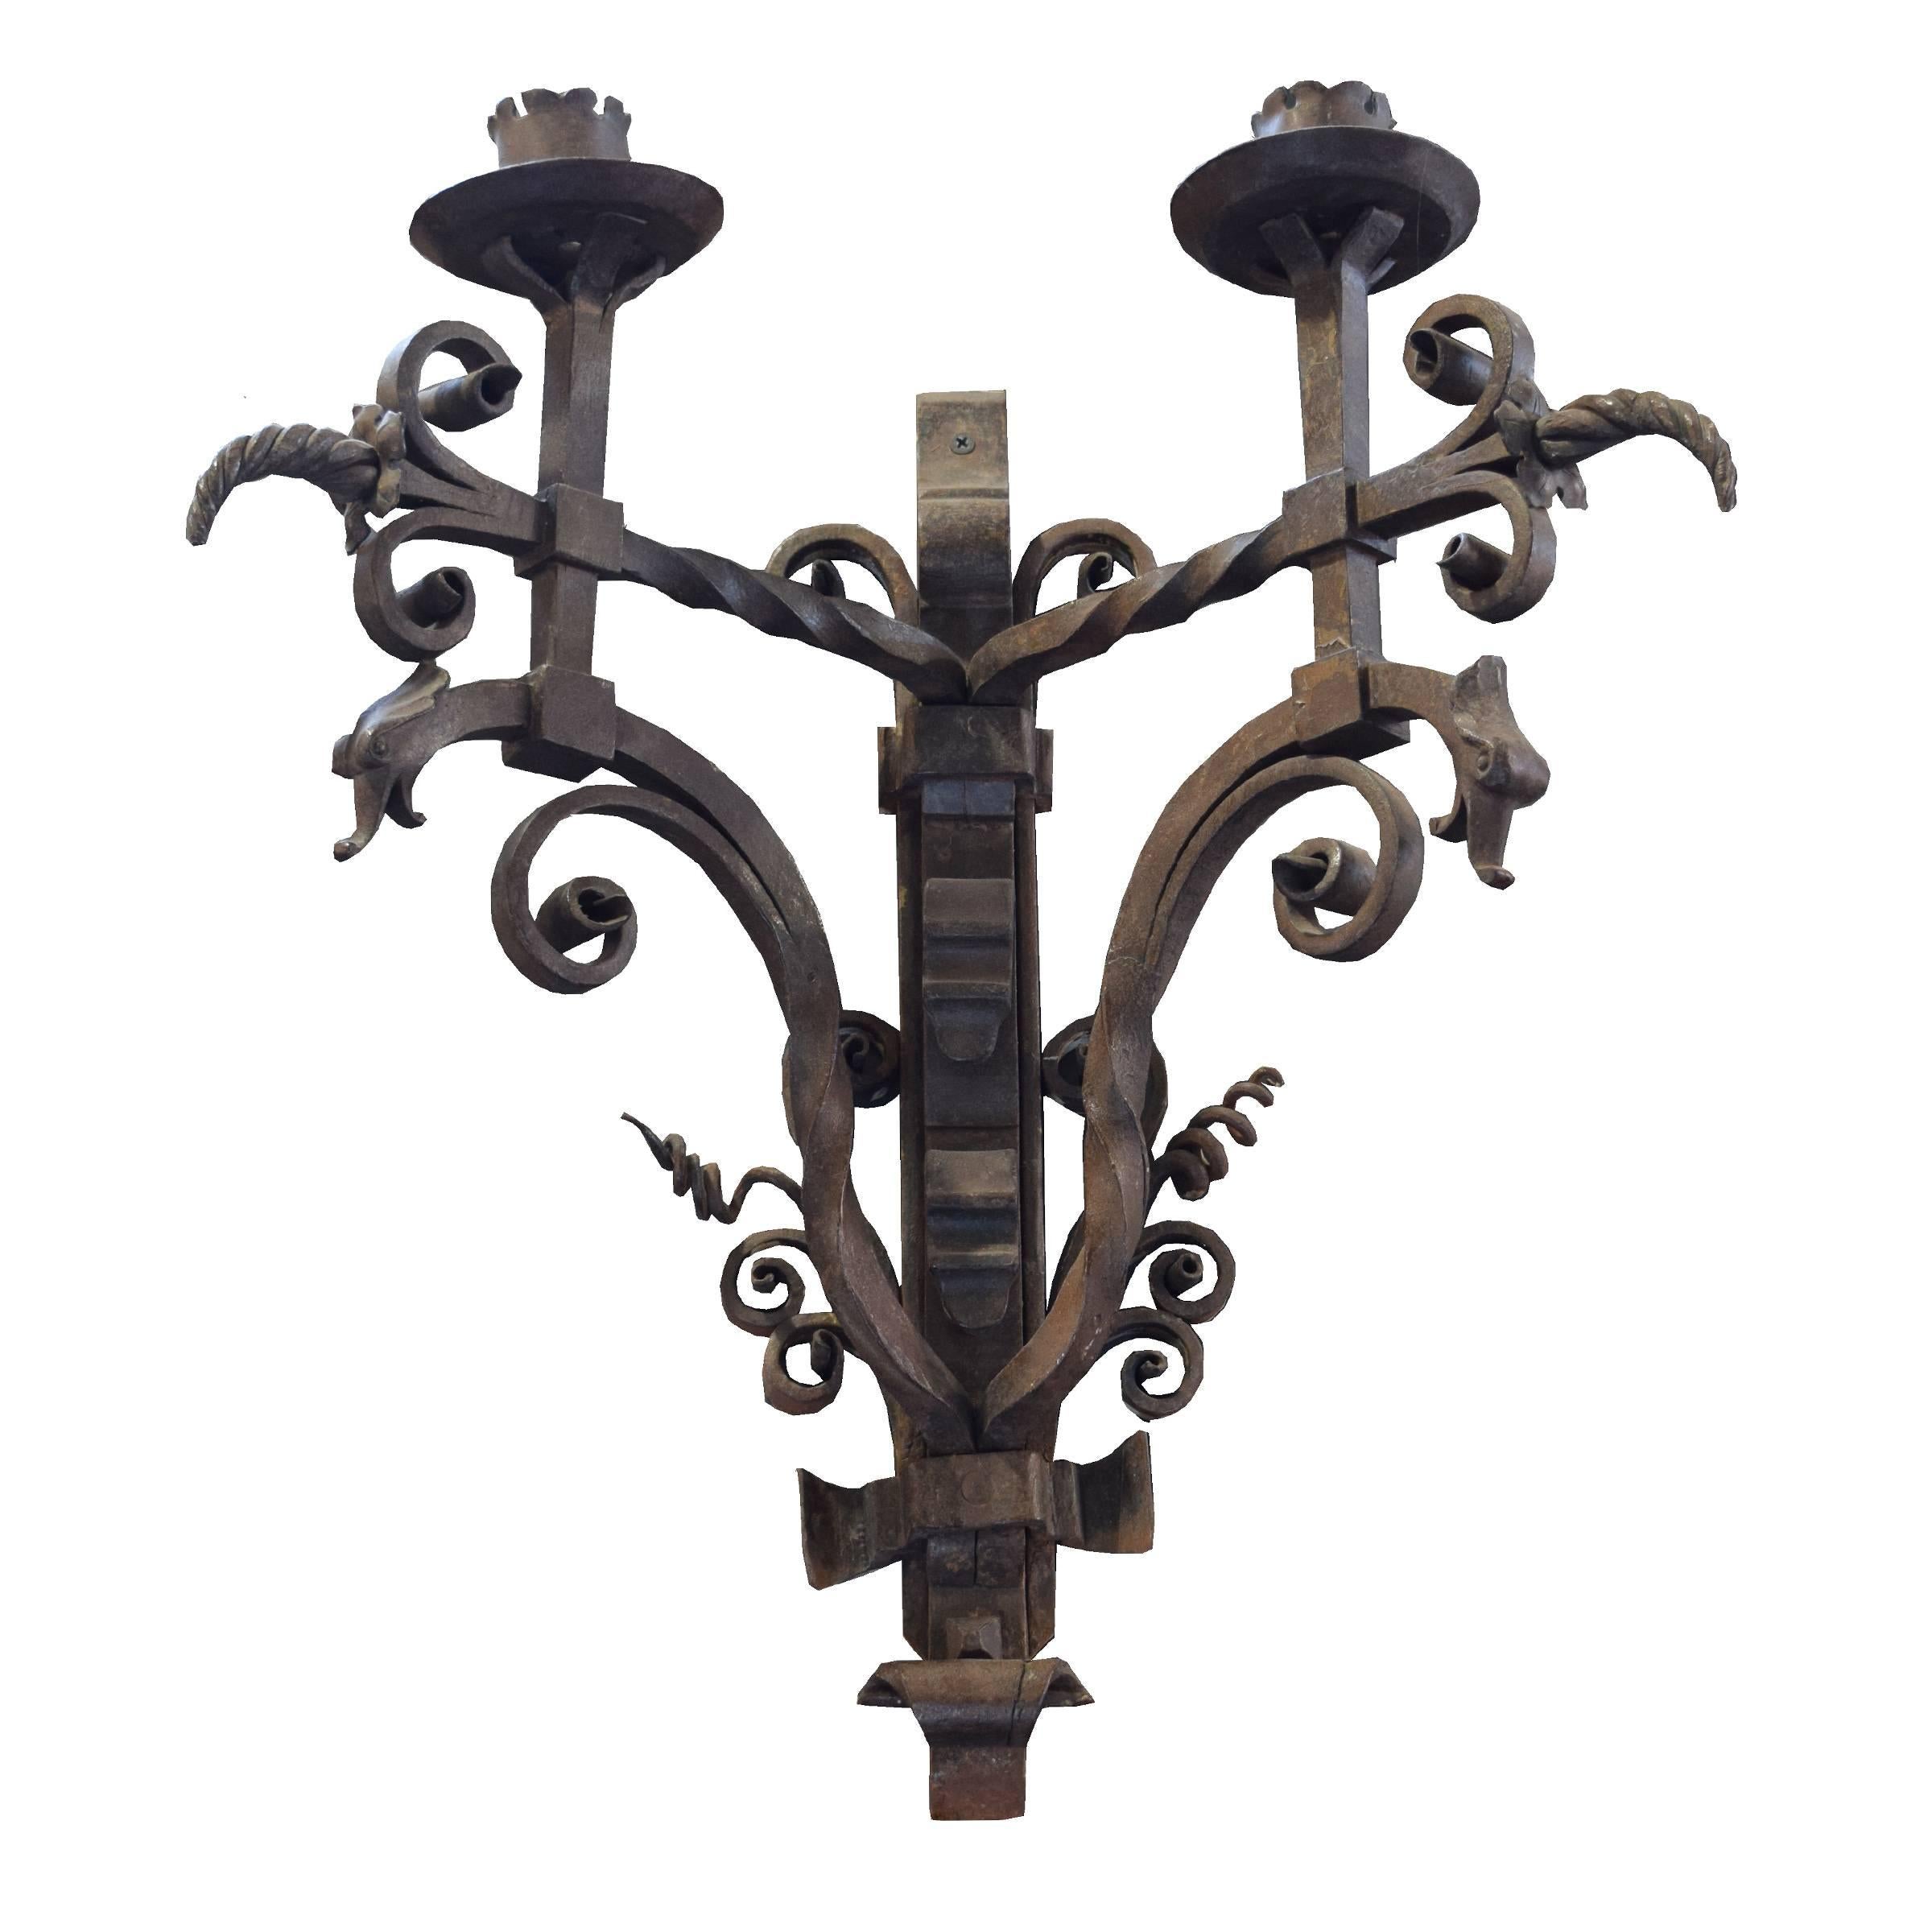 A fantastic pair of French expertly wrought iron two-candle sconces with griffins and an elaborate scrolling motif, 19th century.